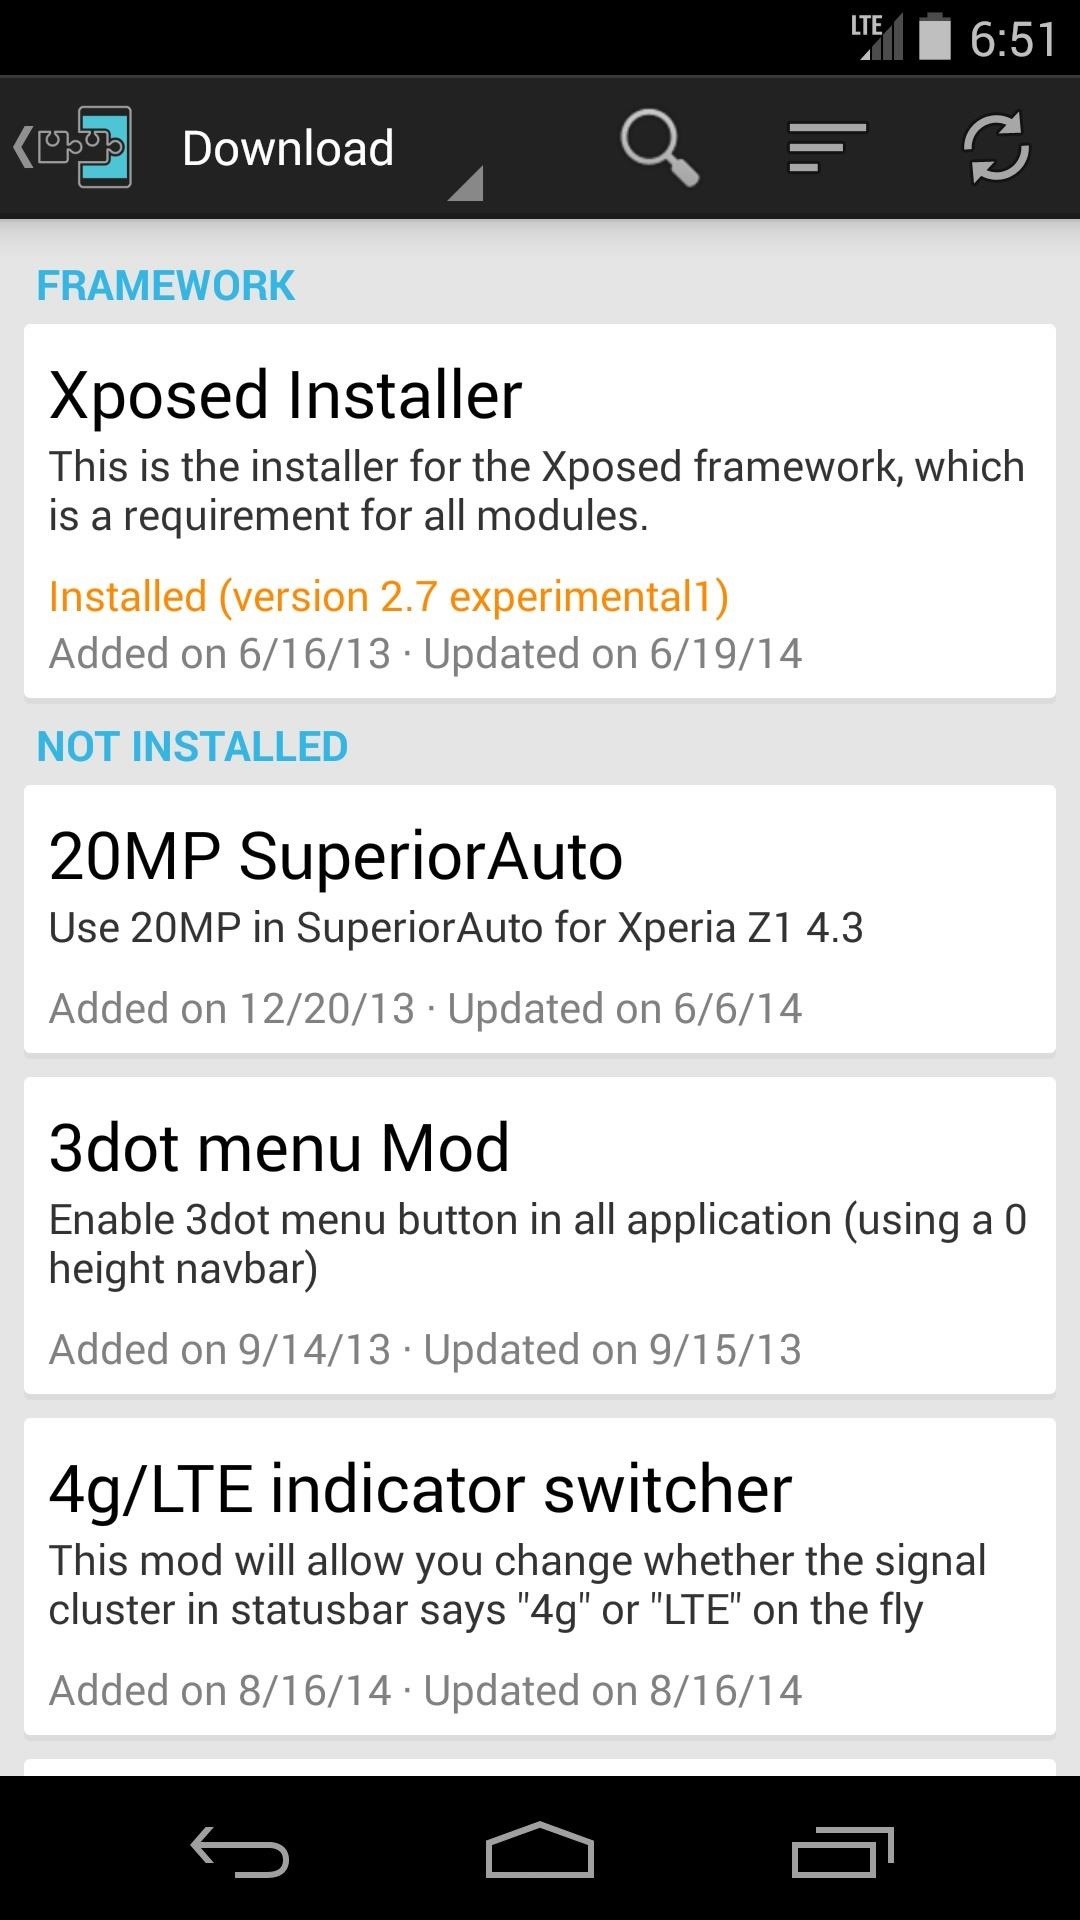 ElementalX: The Only Custom Kernel You Need on Your Nexus 5